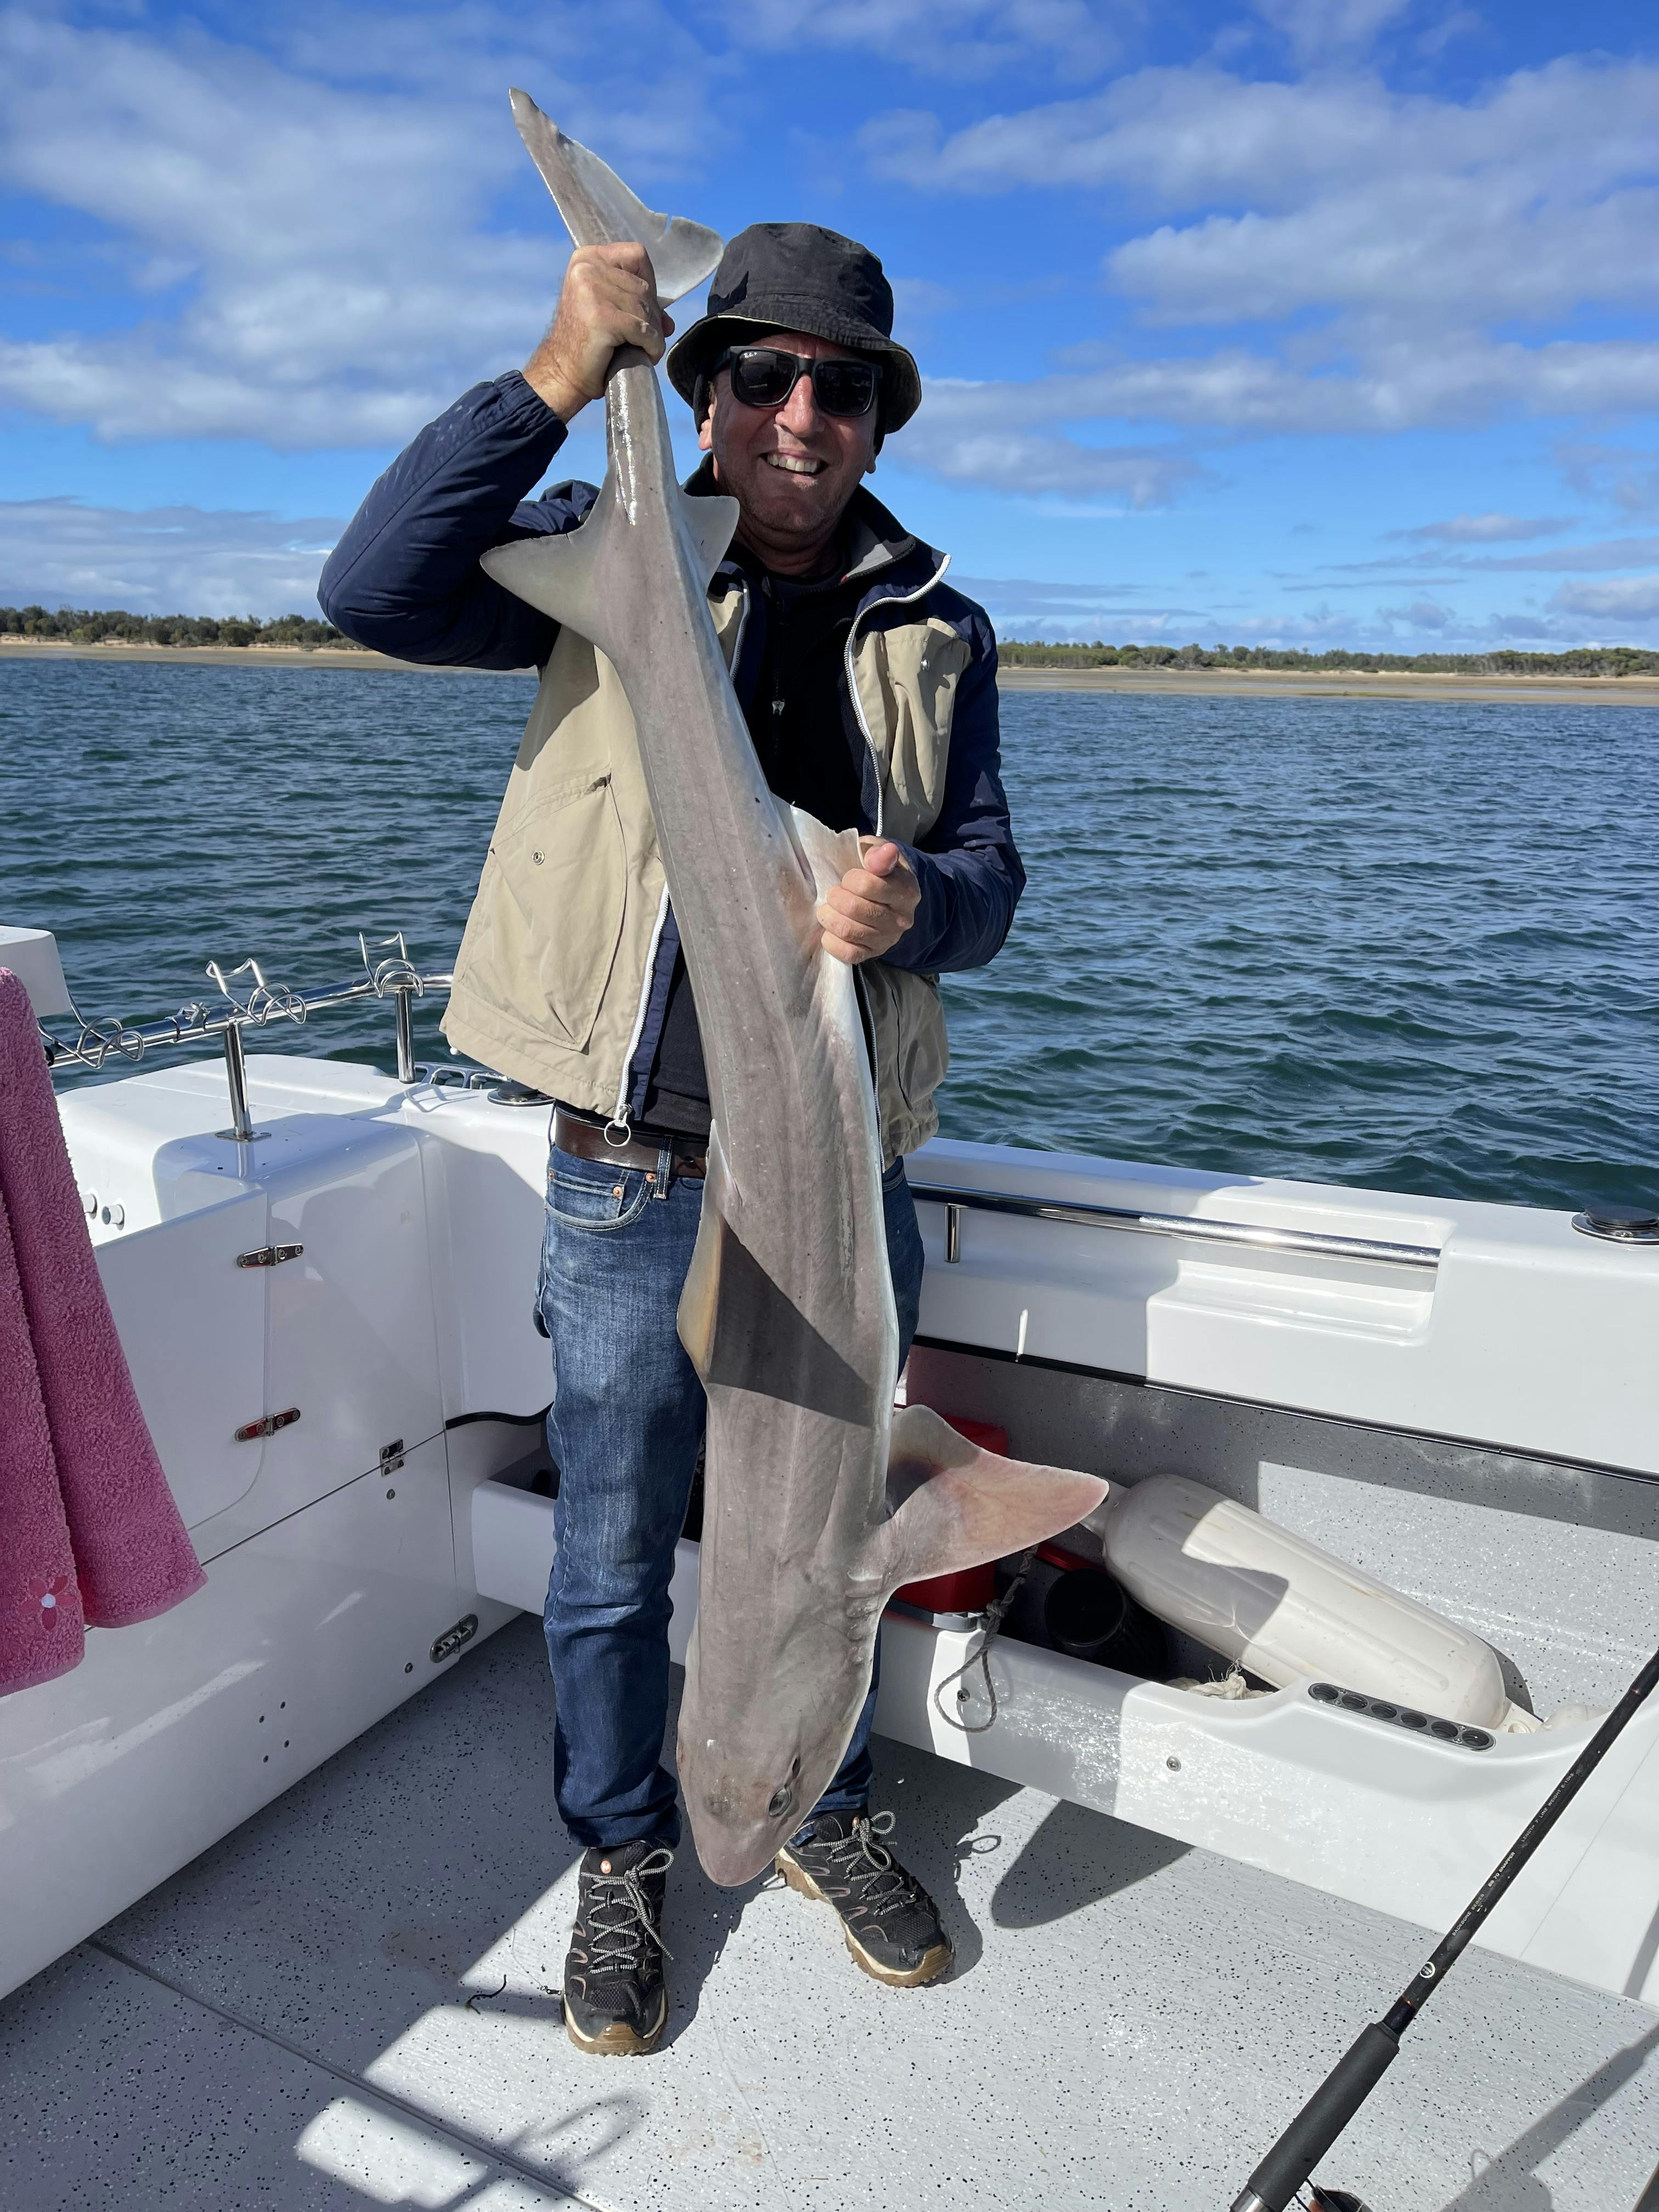 Take a private fishing charter with Port Albert Fishing Charters & Eco Tours